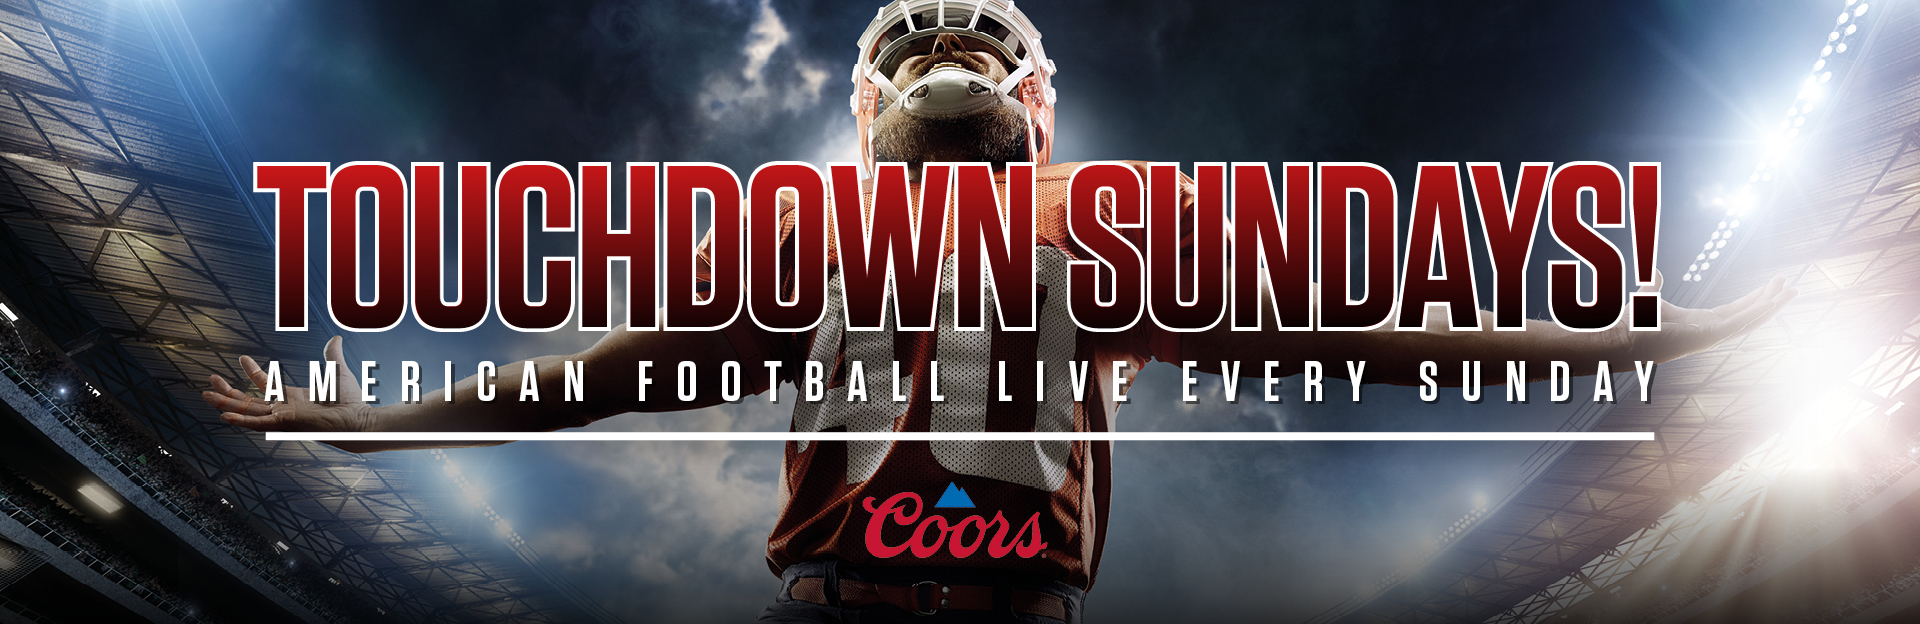 Watch NFL at Shandwick's